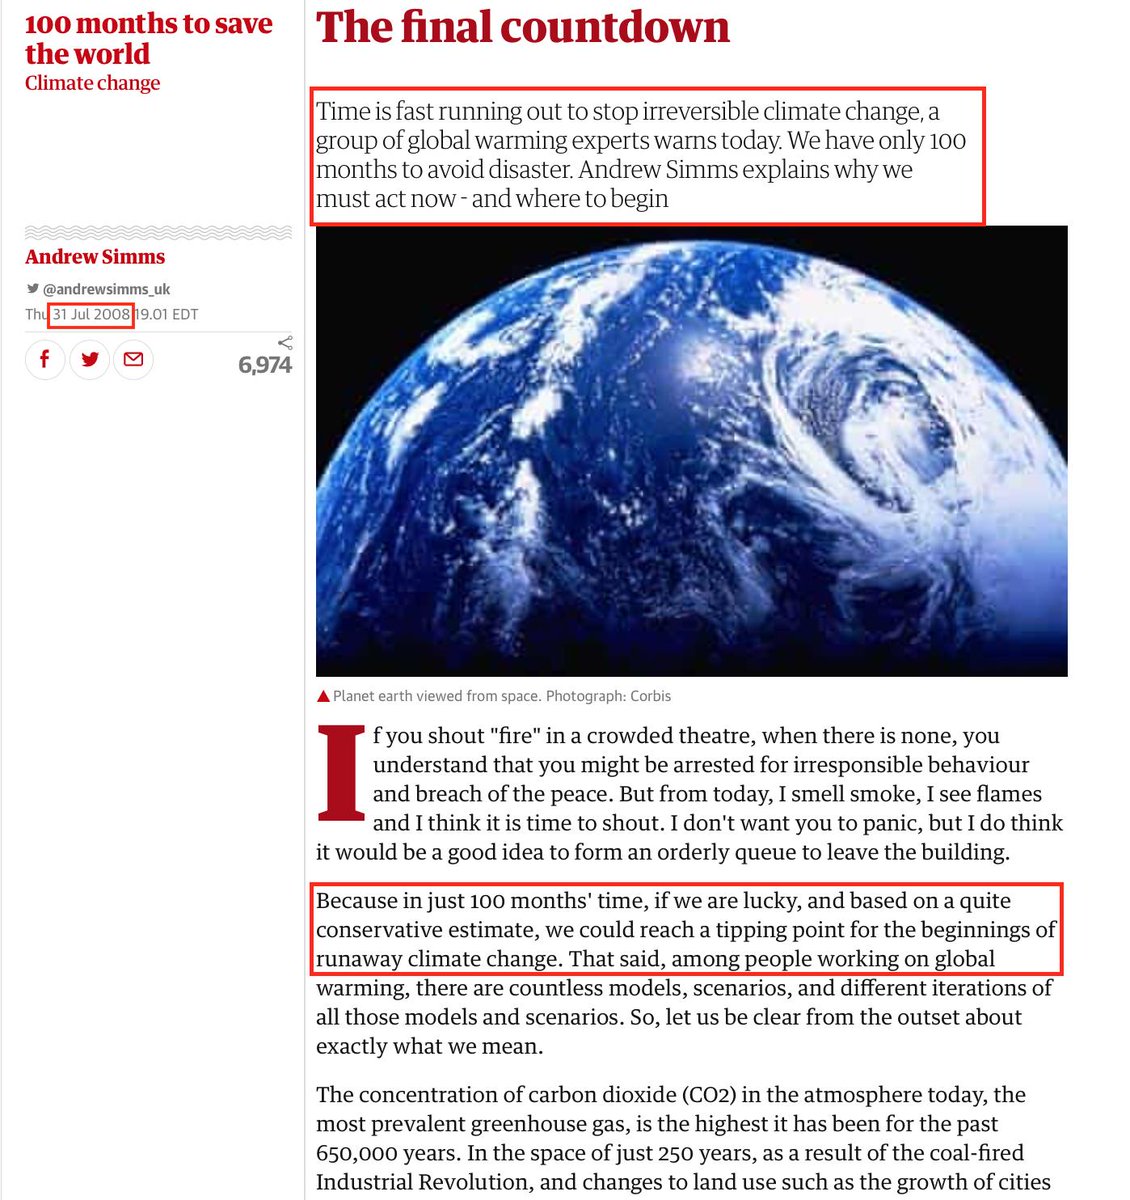 65.2008 - Climate scientists & the Media warned we only had 100 months to stop irreversible climate change. https://www.theguardian.com/environment/2008/aug/01/climatechange.carbonemissions